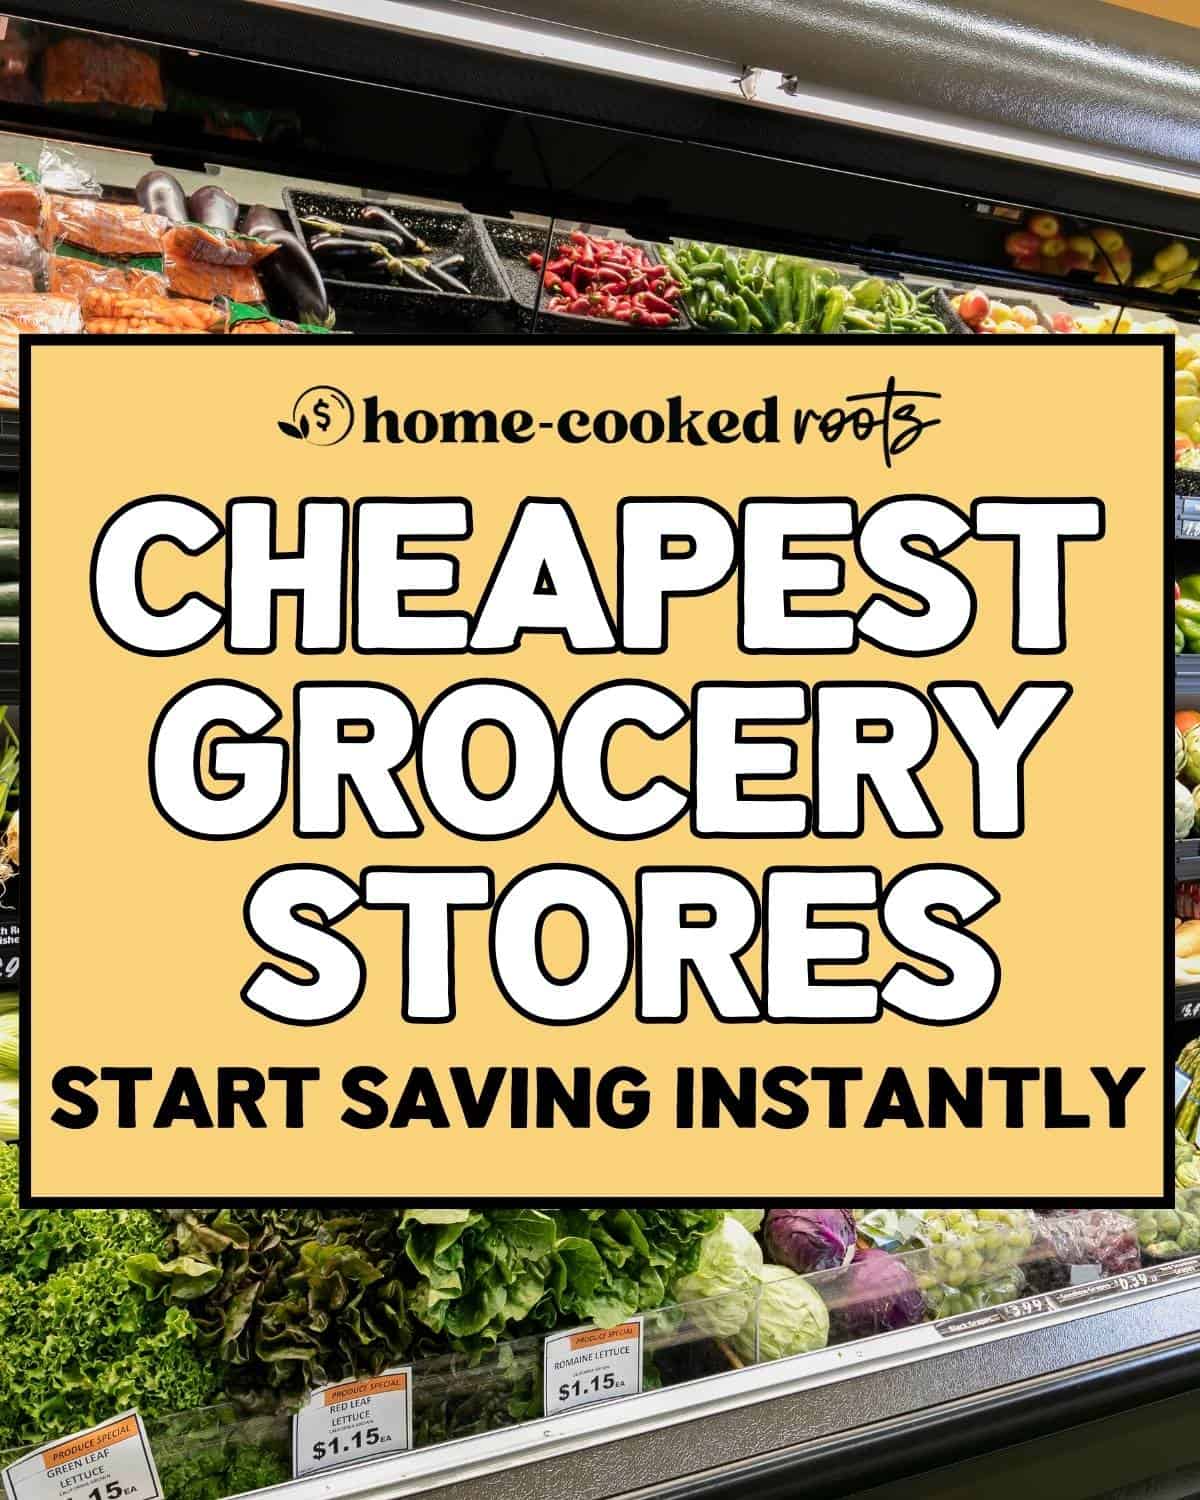 Top 10 Cheapest Grocery Stores That Will Save You Money - Home-Cooked Roots